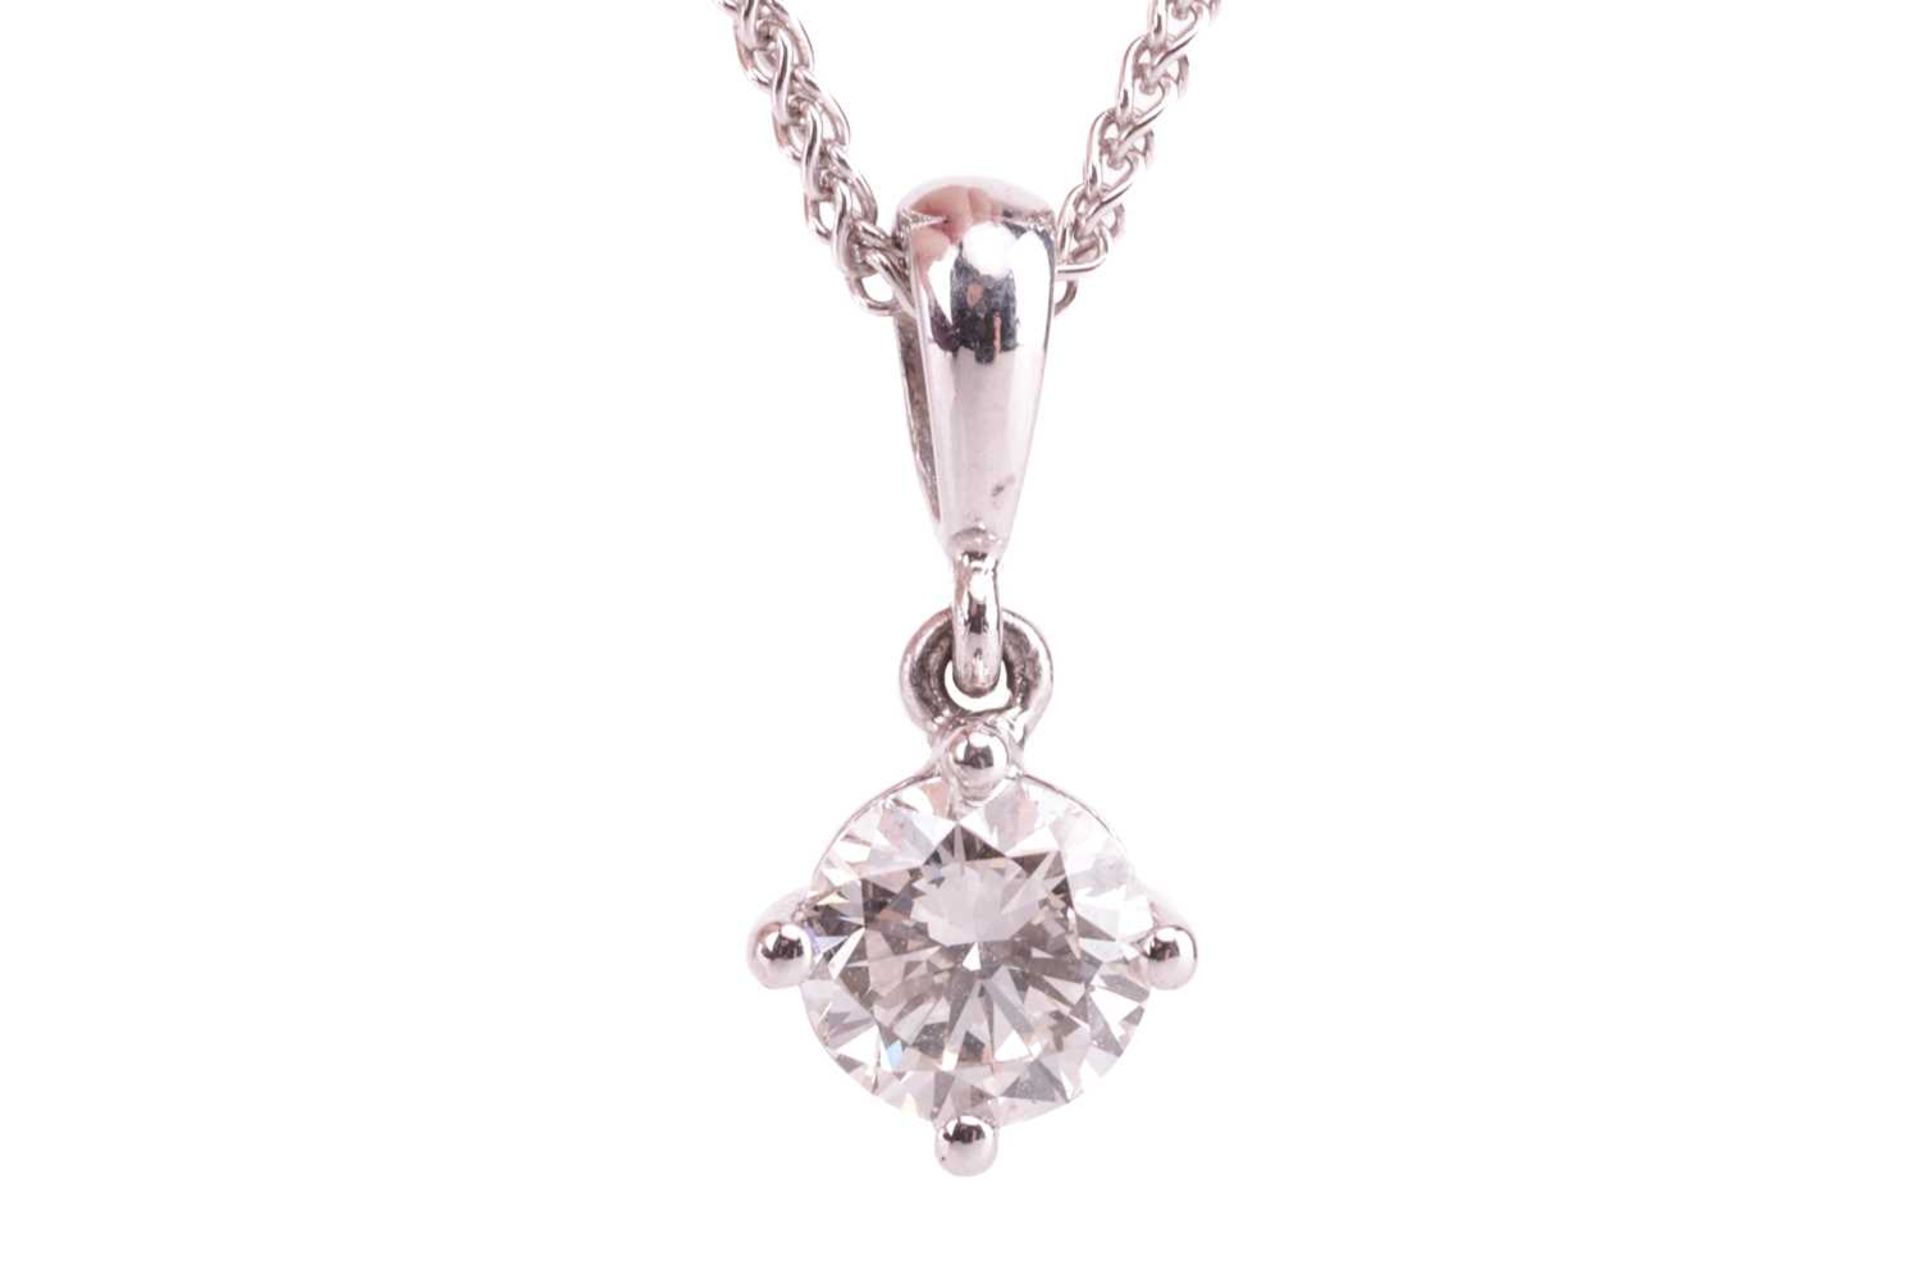 A diamond solitaire pendant, featuring a round brilliant diamond, with an estimated carat weight of 